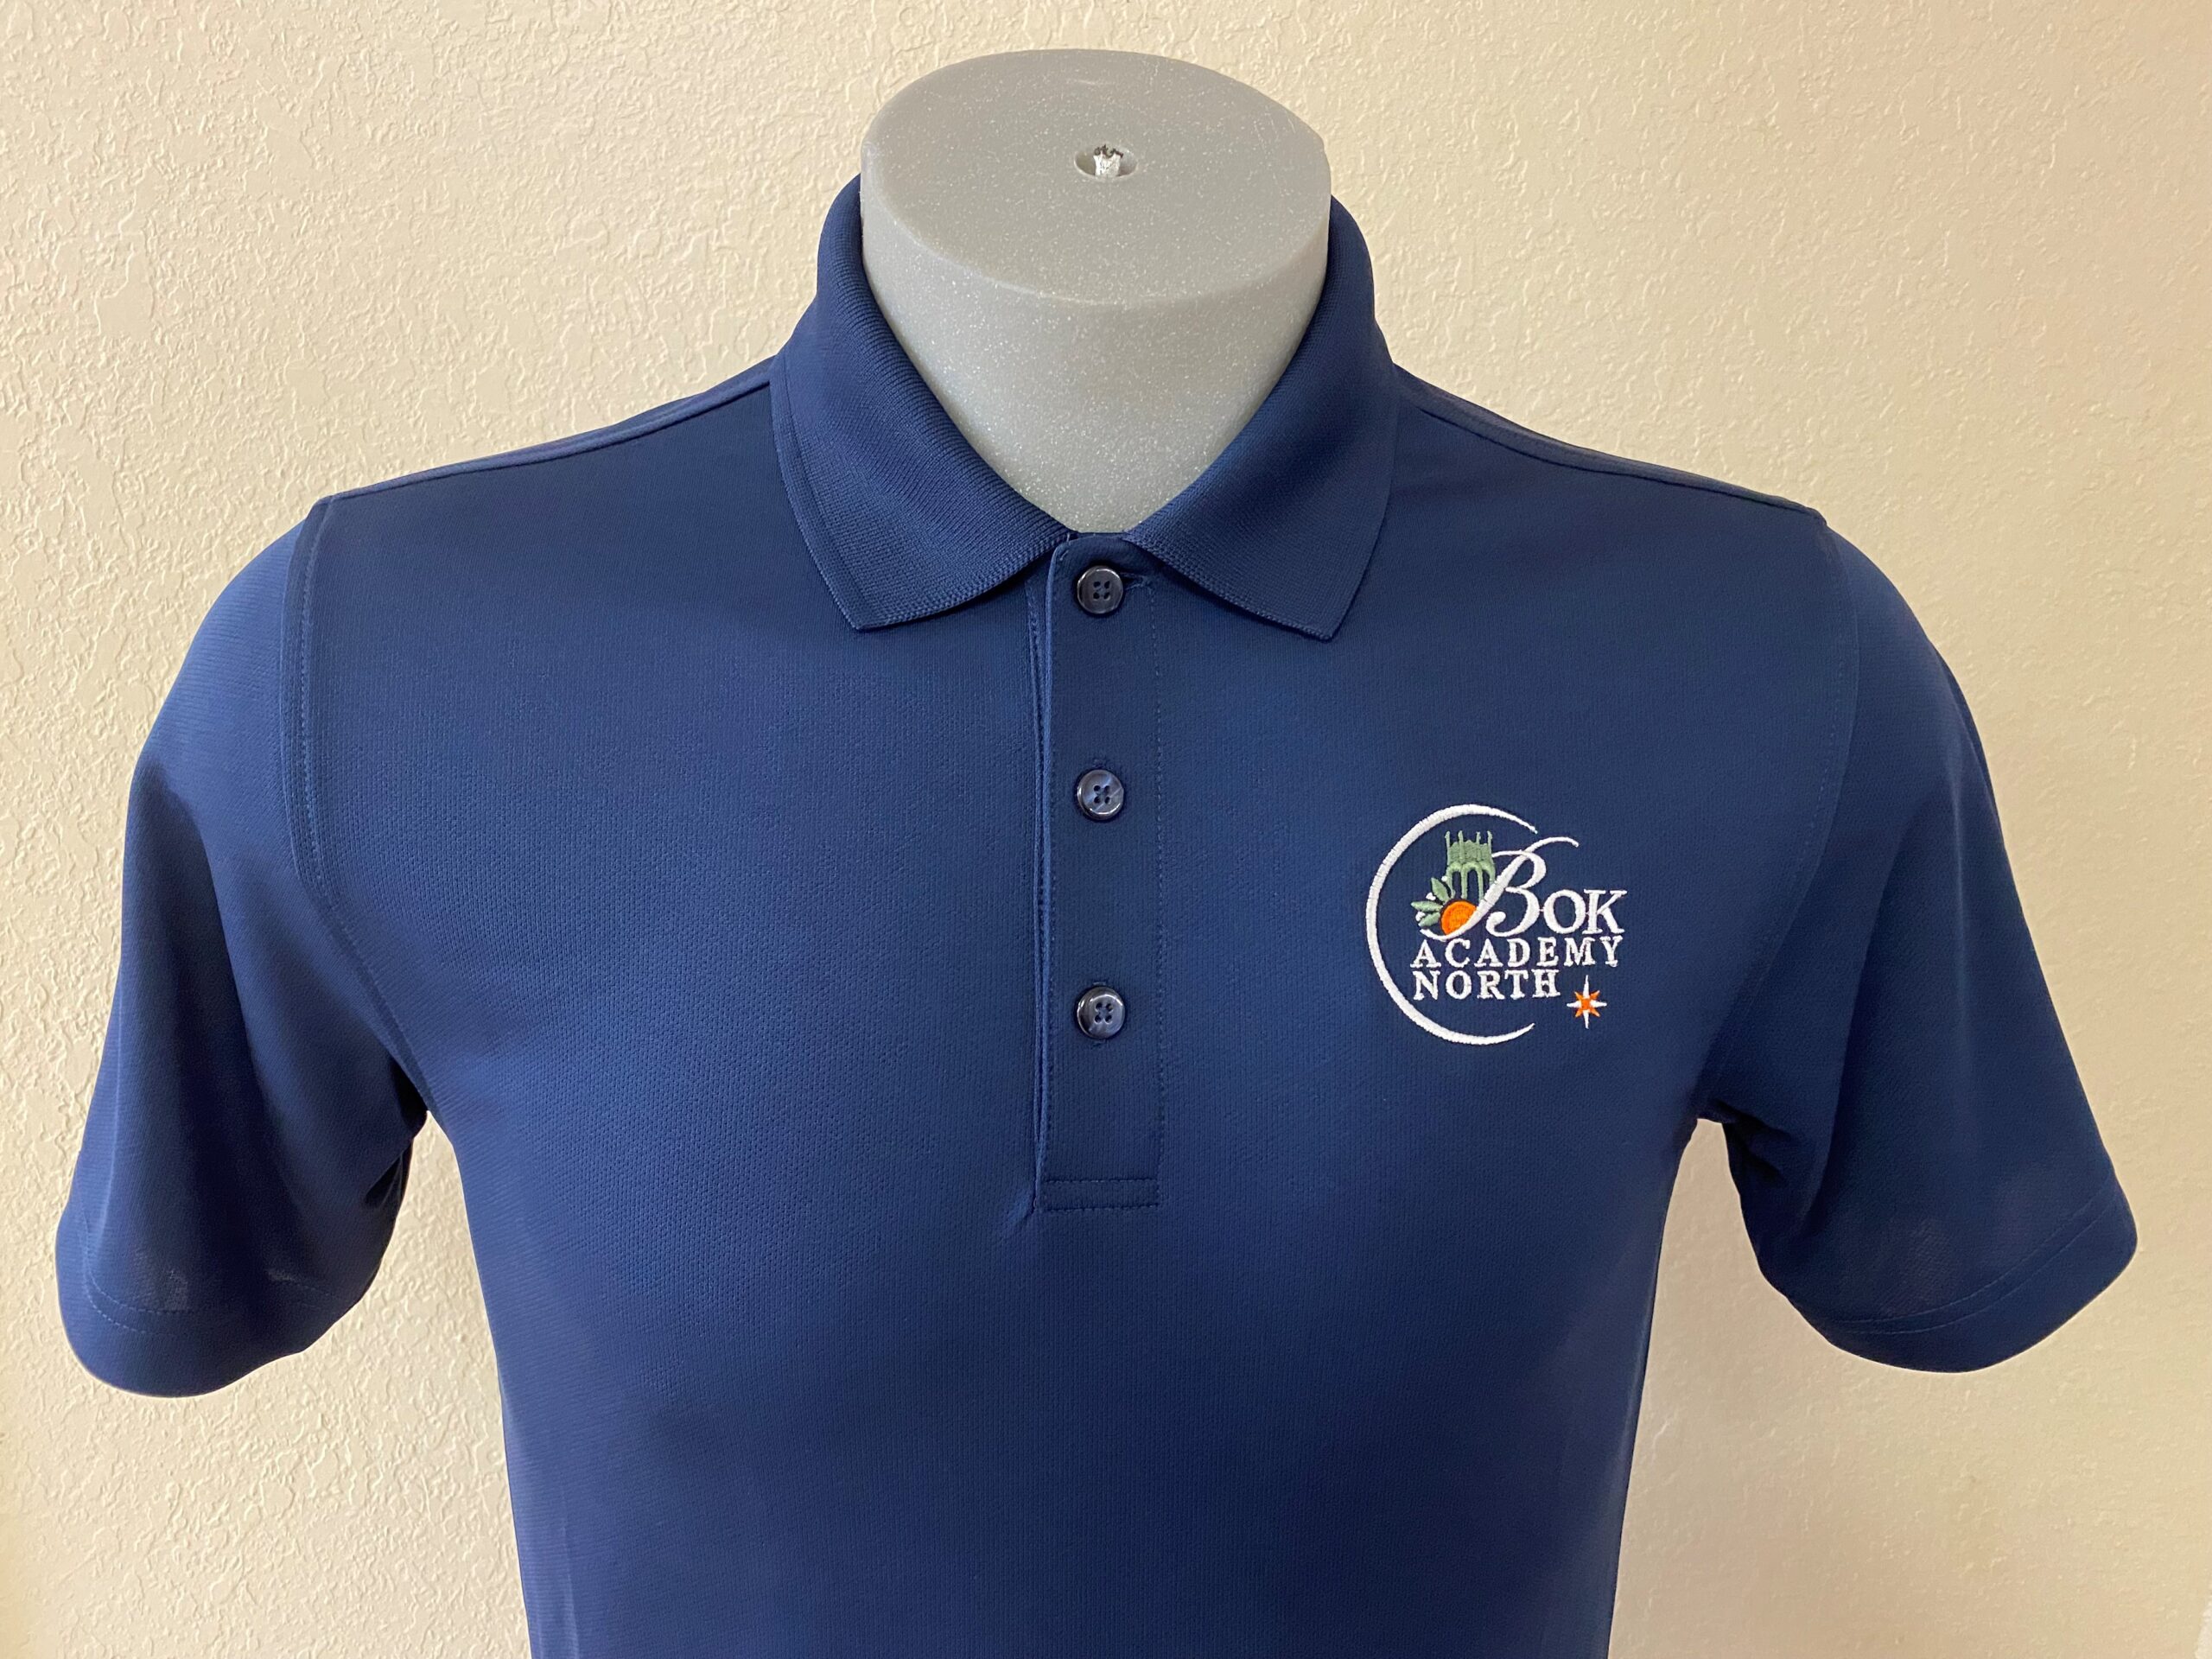 Bok Academy NORTH Dri-fit Polo – Short Sleeve – Applied Images Inc.